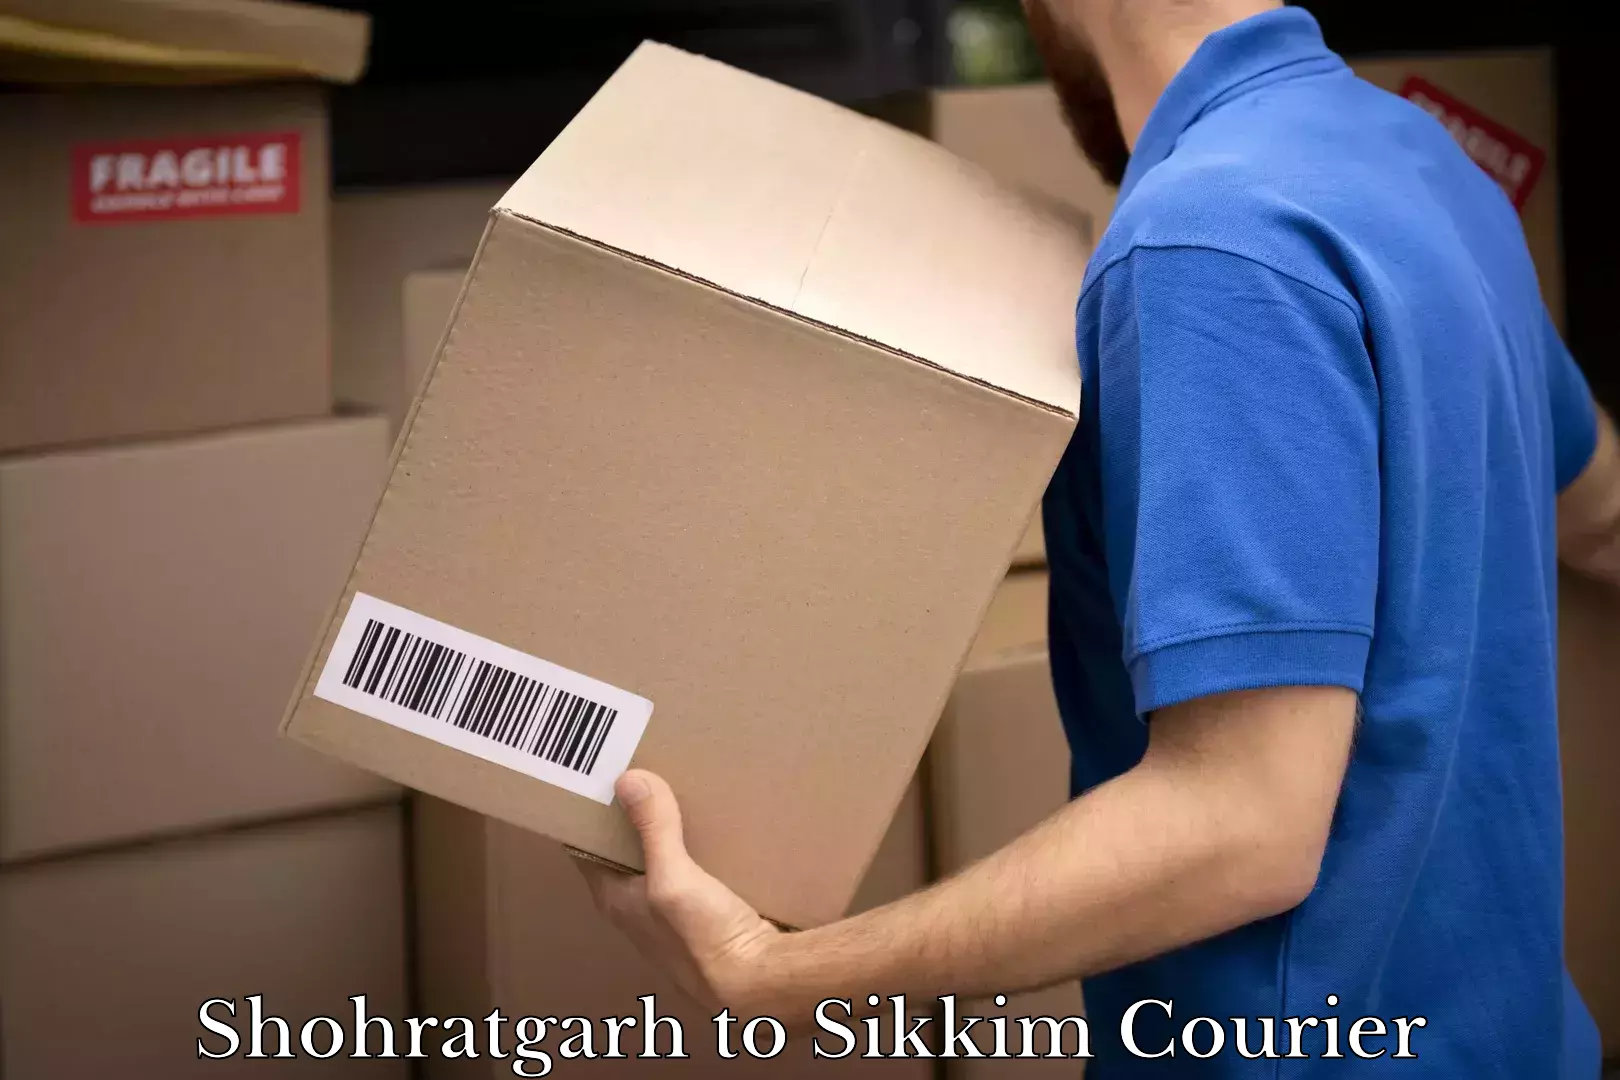 Rapid shipping services Shohratgarh to Sikkim